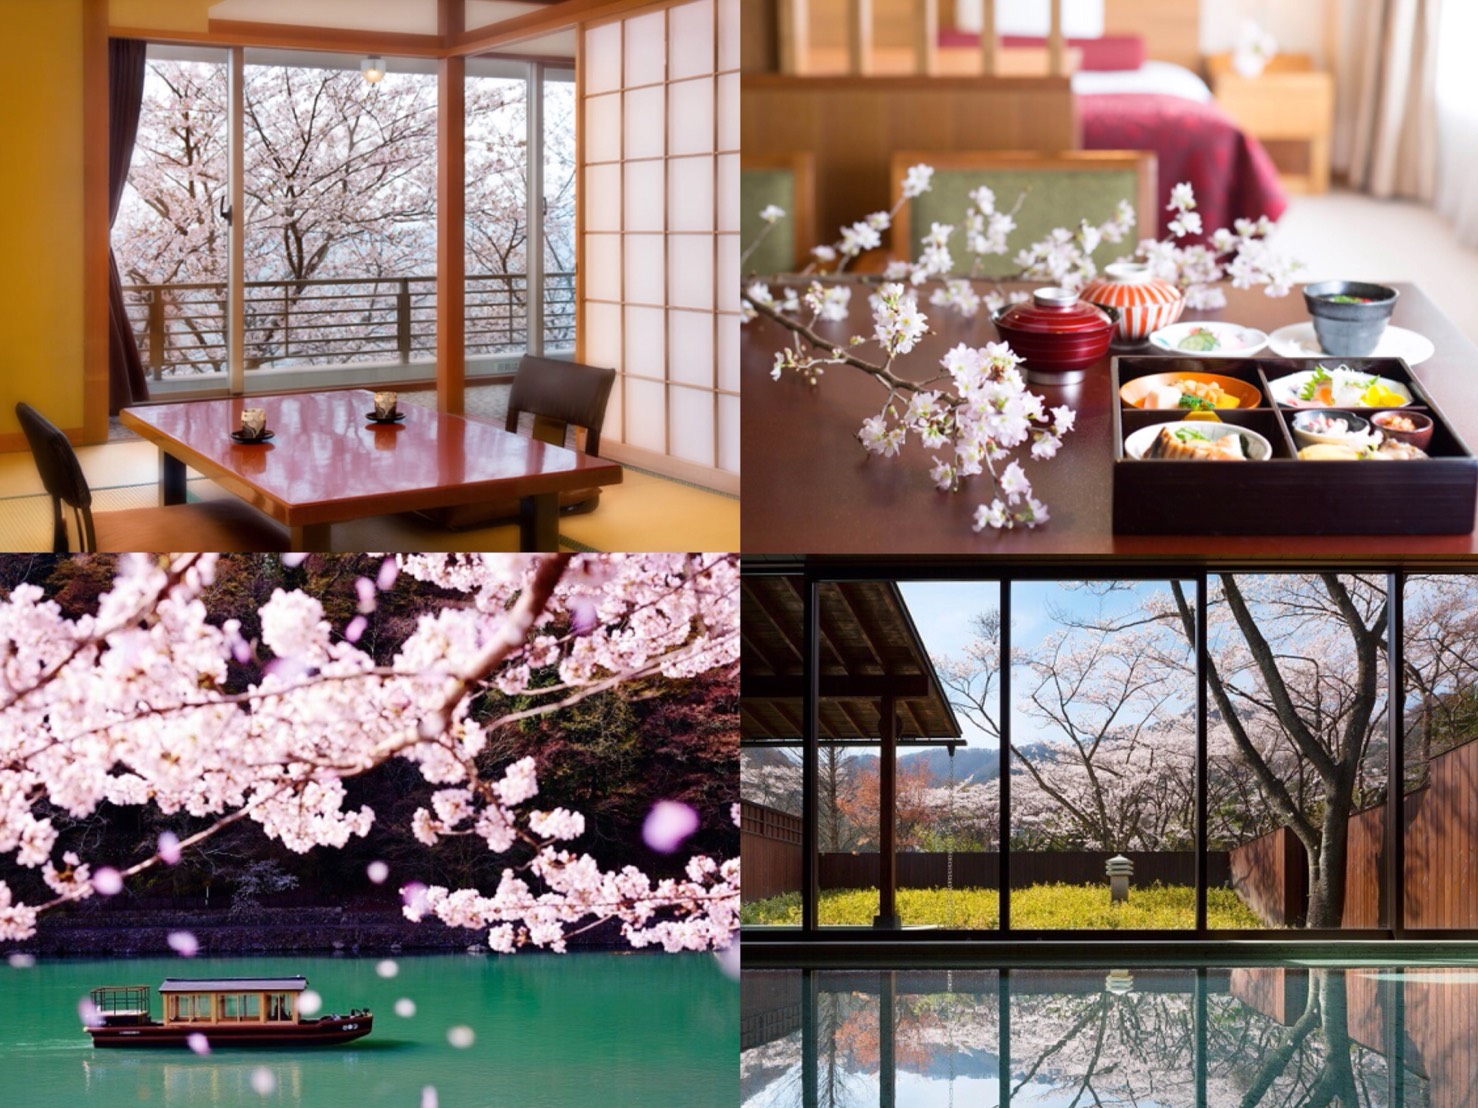 5 Hotels & Ryokan to Enjoy Cherry Blossoms: From Inside Your Room to Inside a Hot Spring!